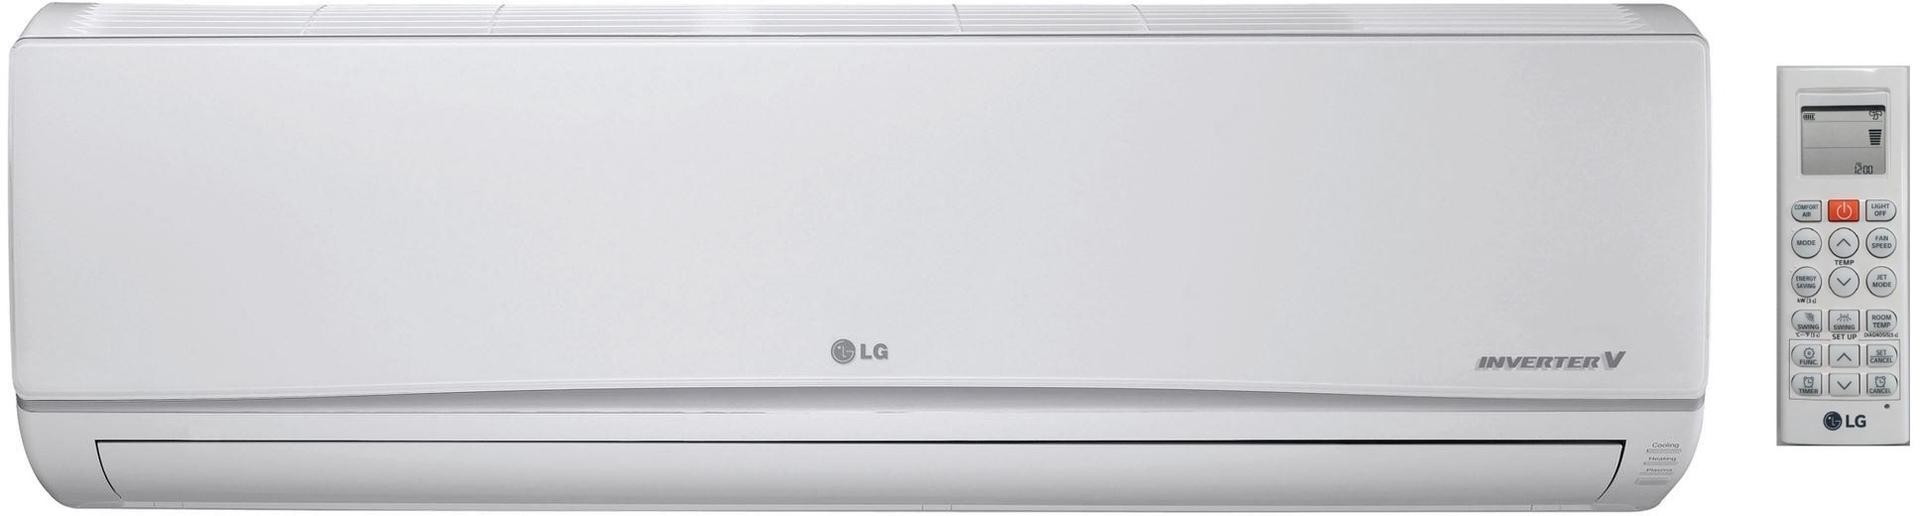 Lg Lsn090hsv5 9 000 Btu Multi F Standard Wall Mounted Multi Zone Inverter Heat Pump High Efficiency Indoor Unit With Built In Wifi 10 900 Btu Heating Capacity 4 Way Auto Swing 24 Hour On Off Timer Auto